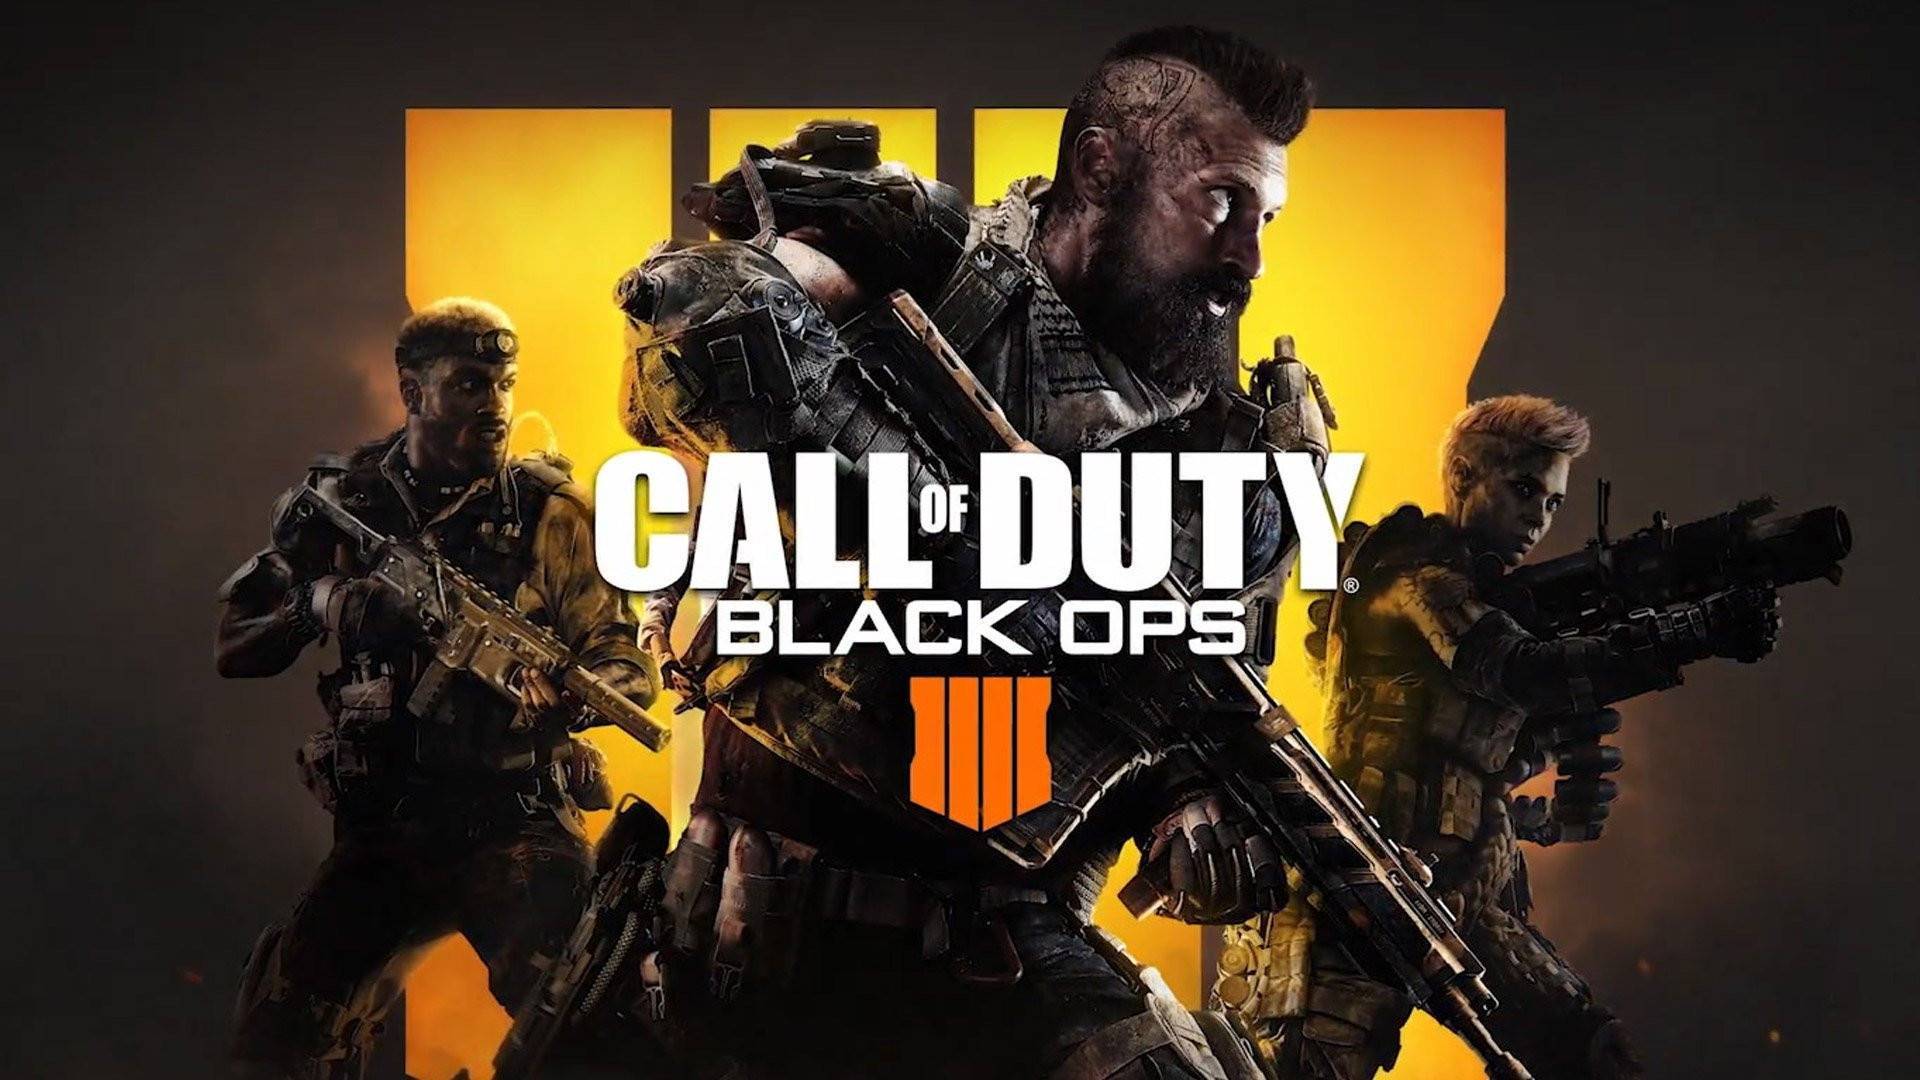 call of duty black ops pc